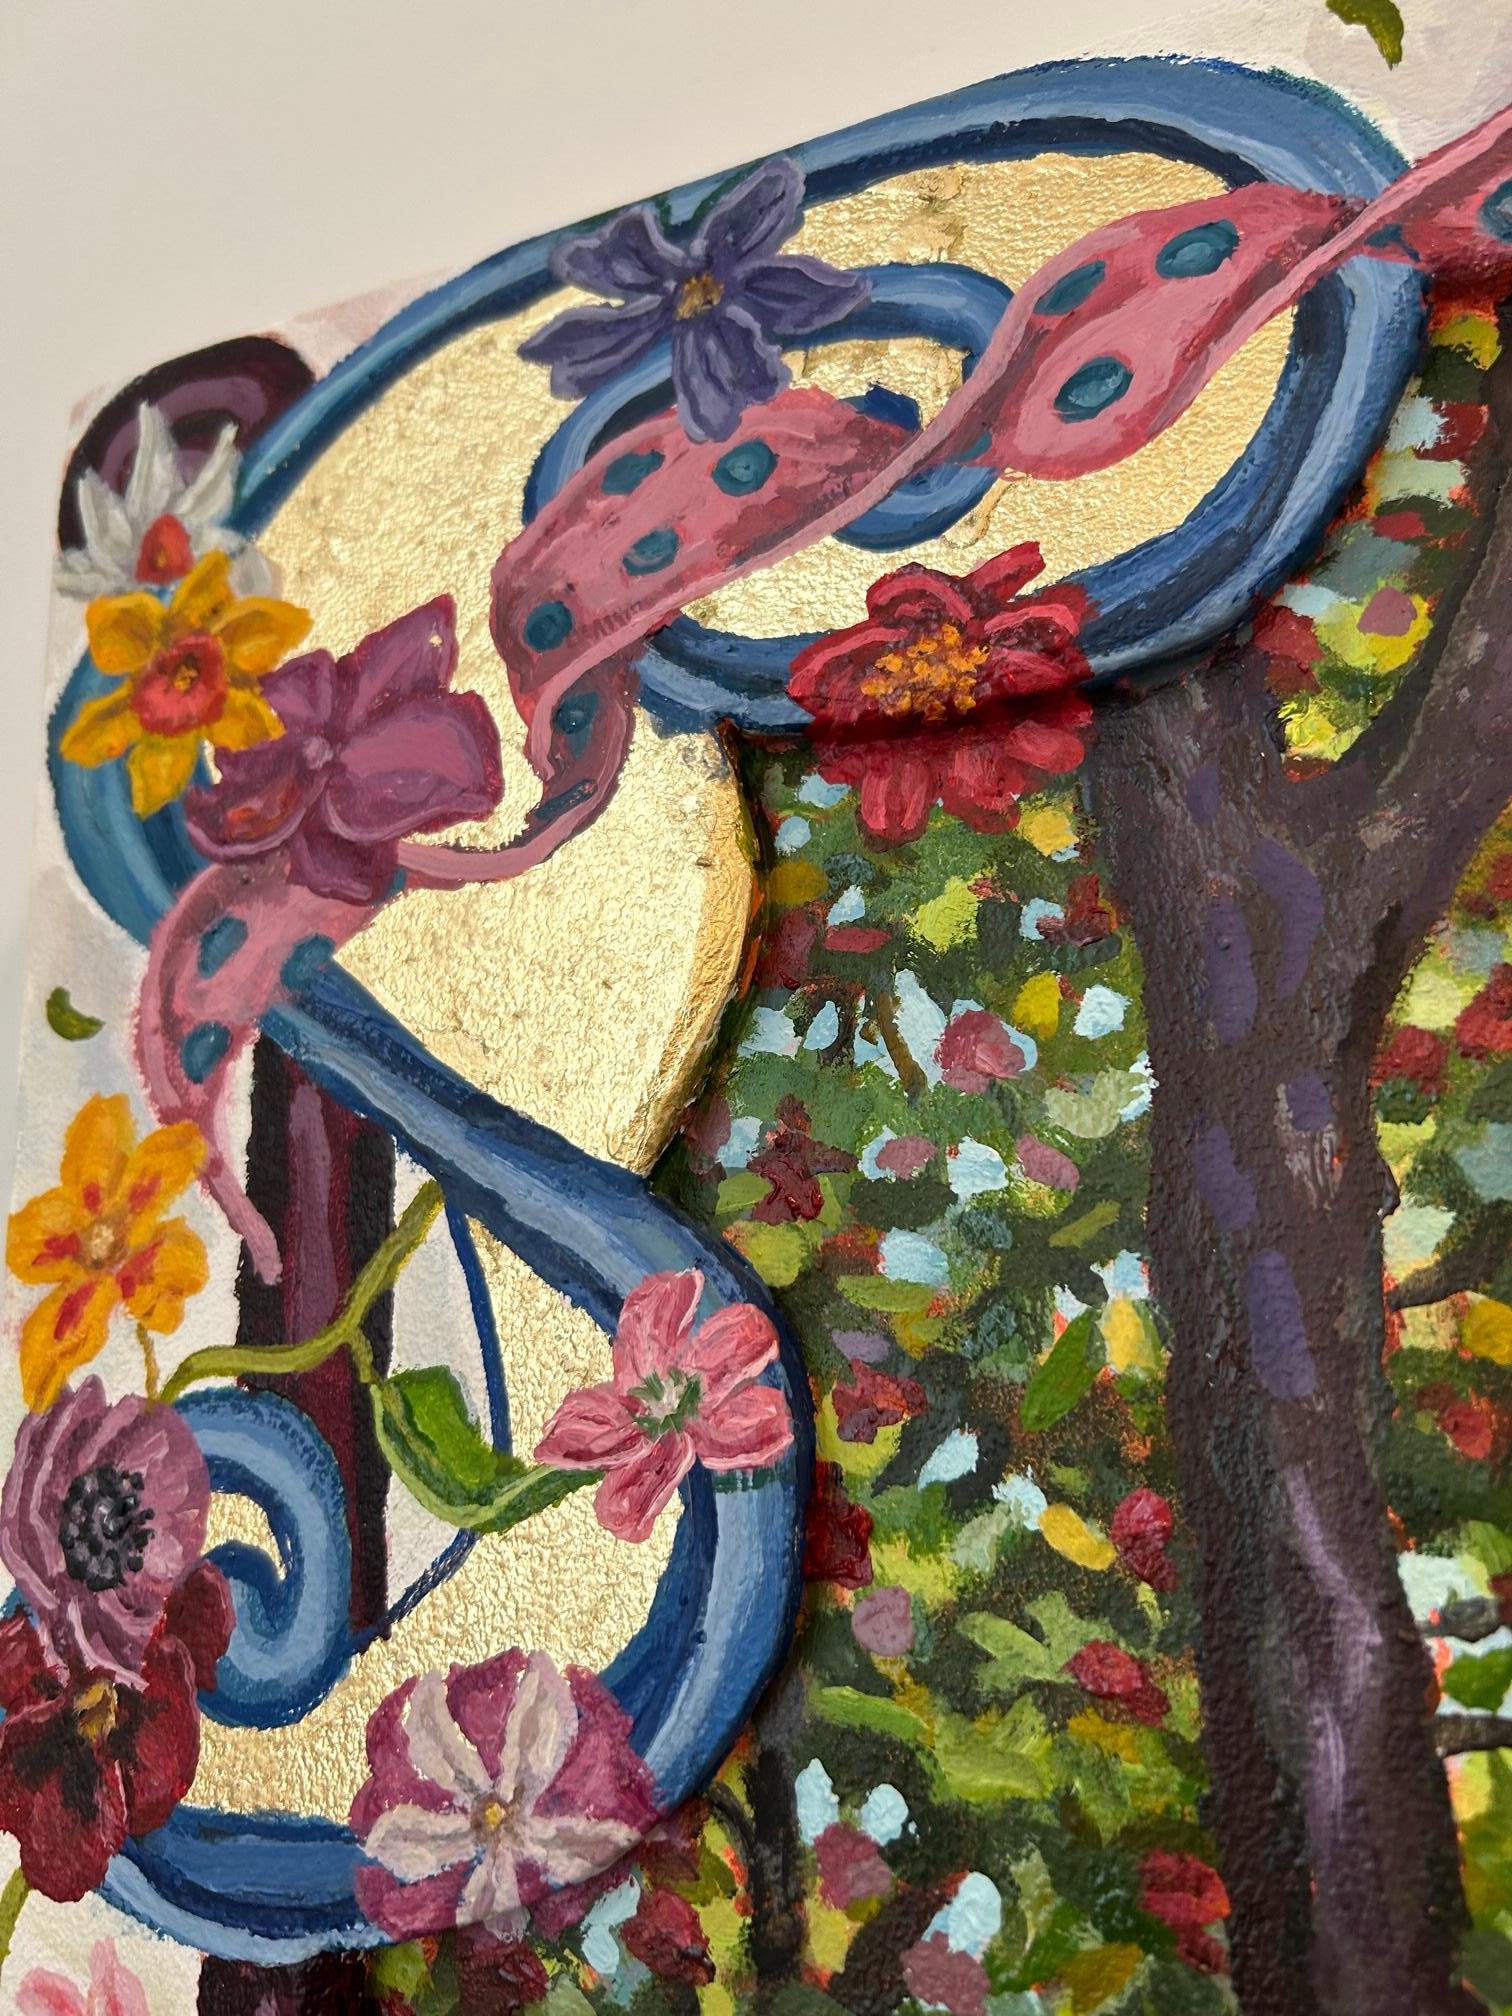 Represented by George Billis Gallery. The bold flowers and repeating geometric patterns in this series of paintings are lushly modeled in oil paint, and are coupled with the use of inlaid wood. Surrounding the colorful and whimsical bouquets and